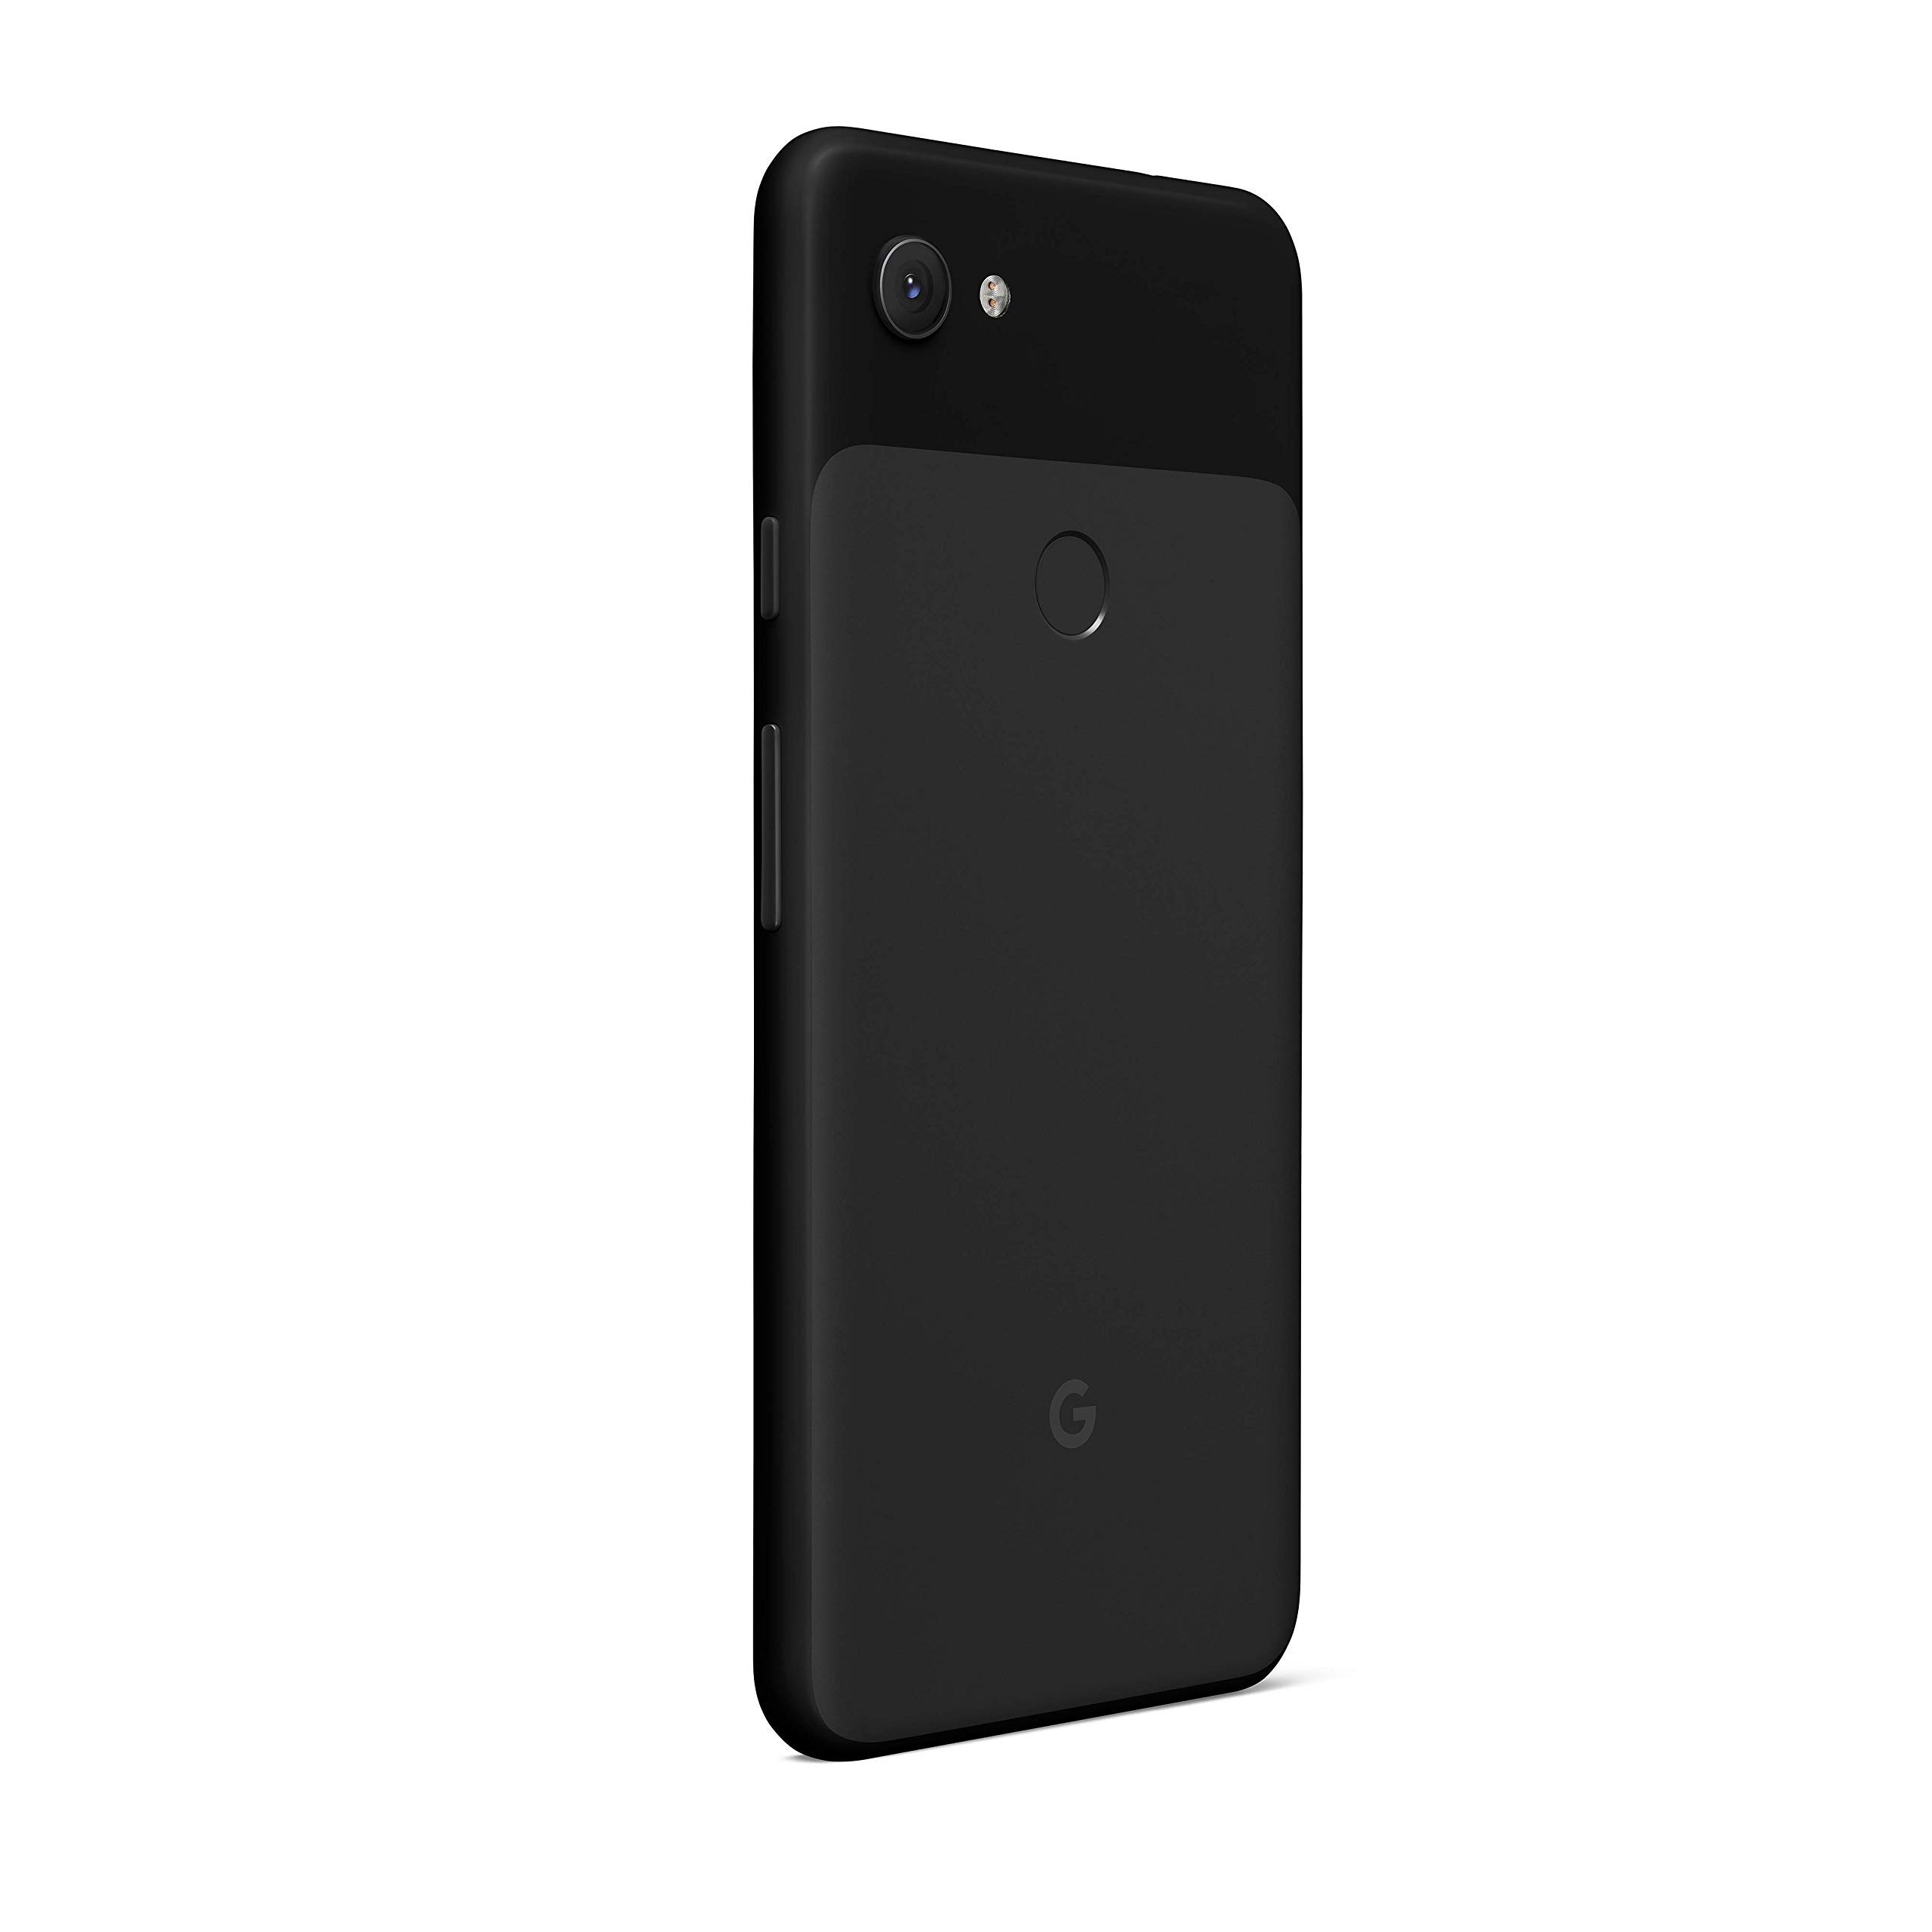 Google - Pixel 3a X-Large with 64GB Memory Cell Phone (Unlocked) - Just Black (G020C)